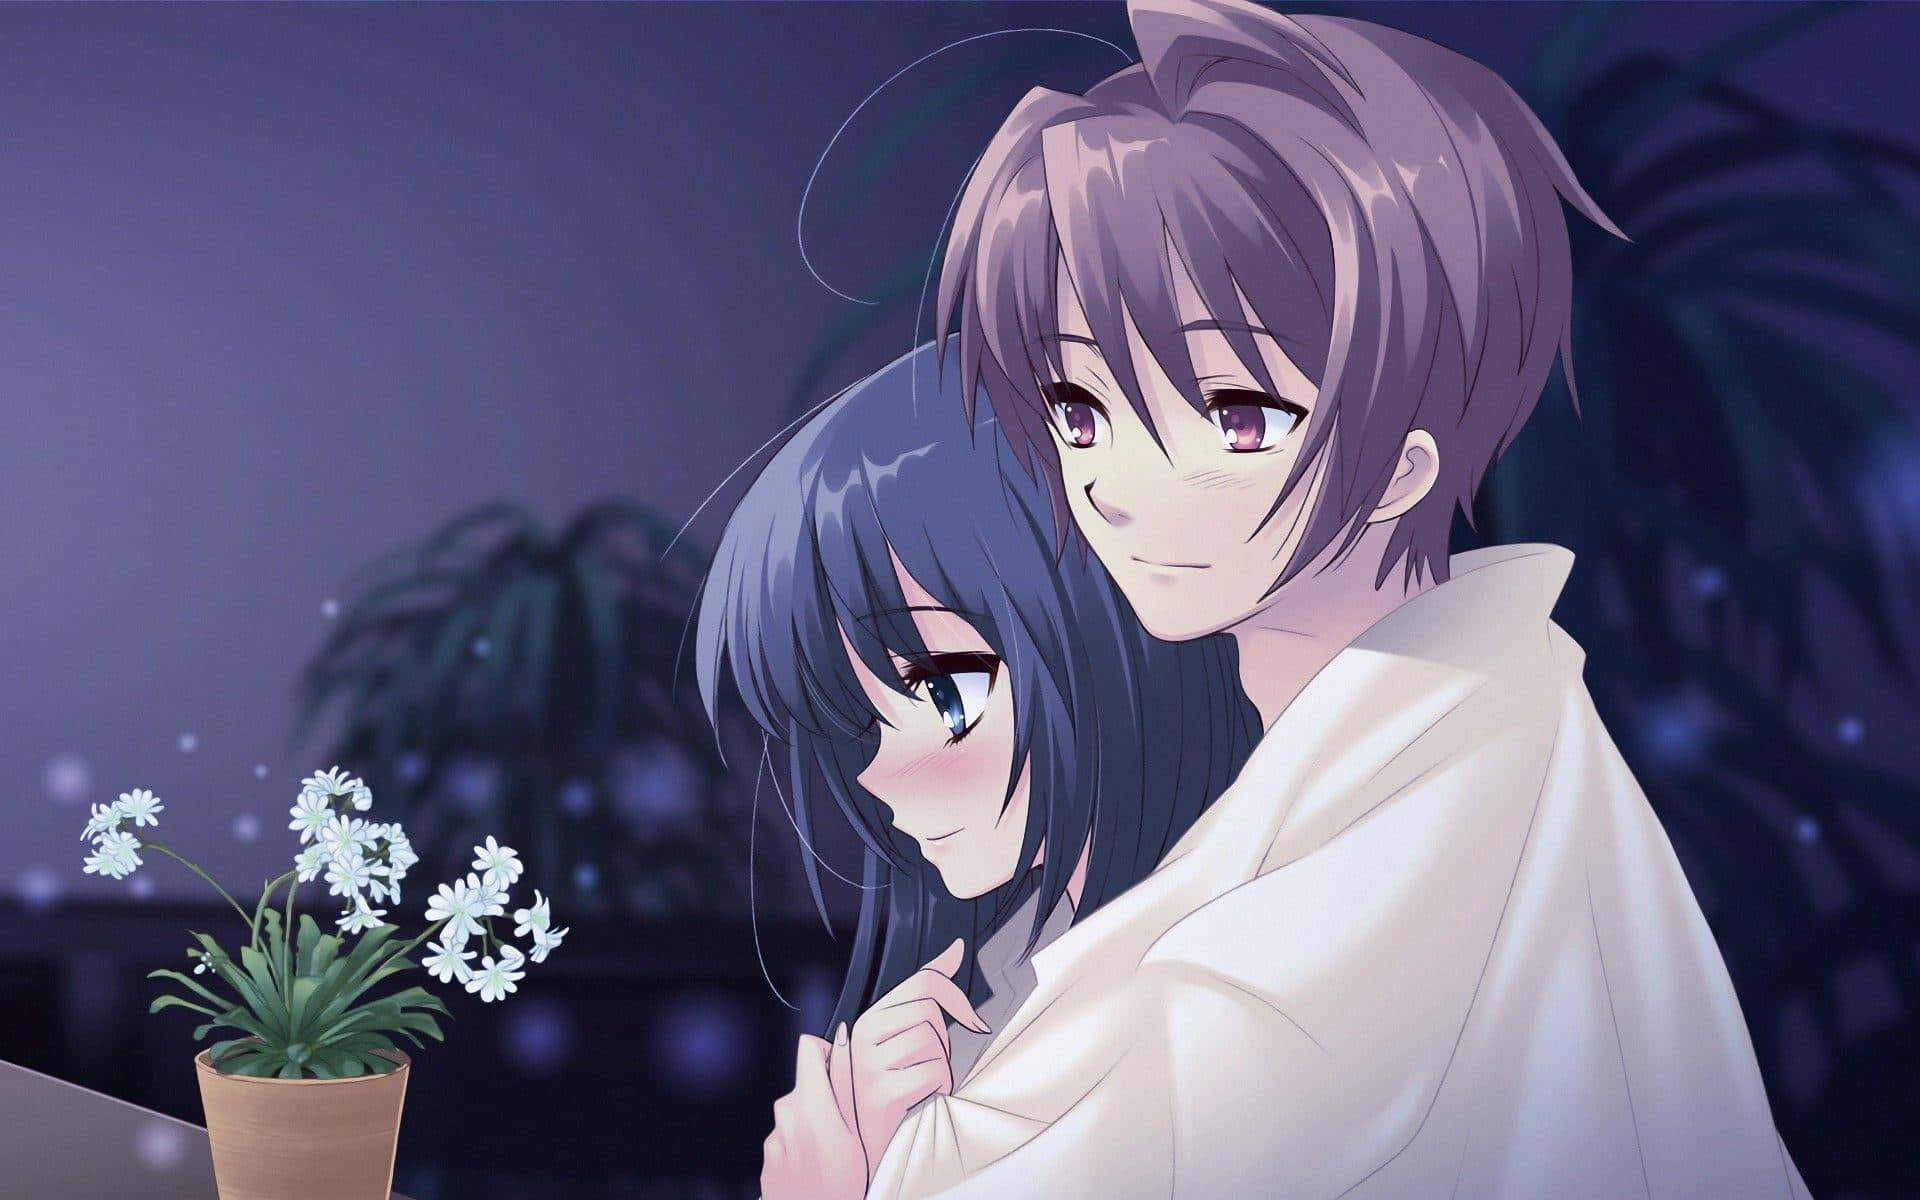 Image  Aesthetic Anime Couple Sharing a Sweet Moment Wallpaper